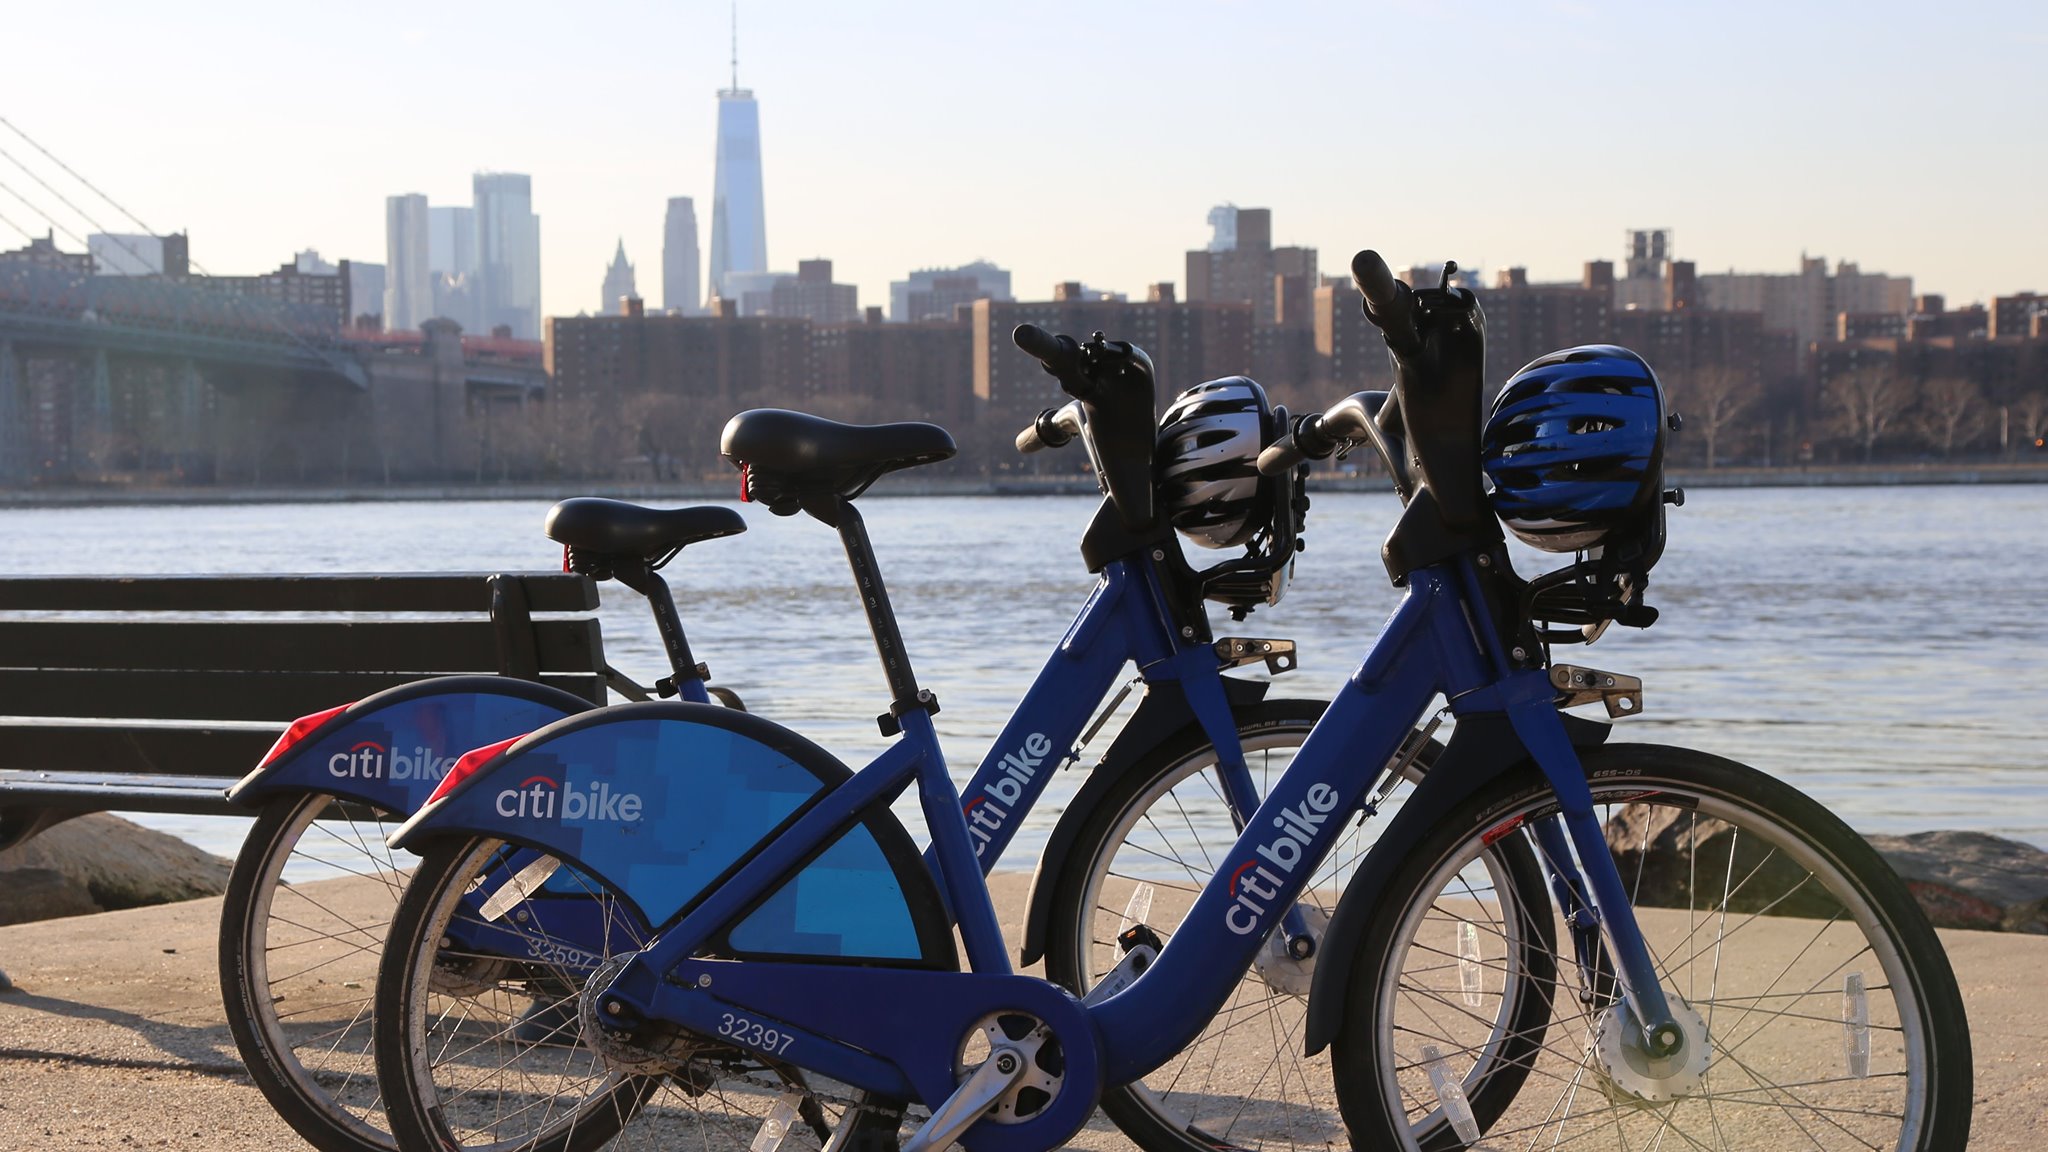 2 citi bikes parked on the waterfront